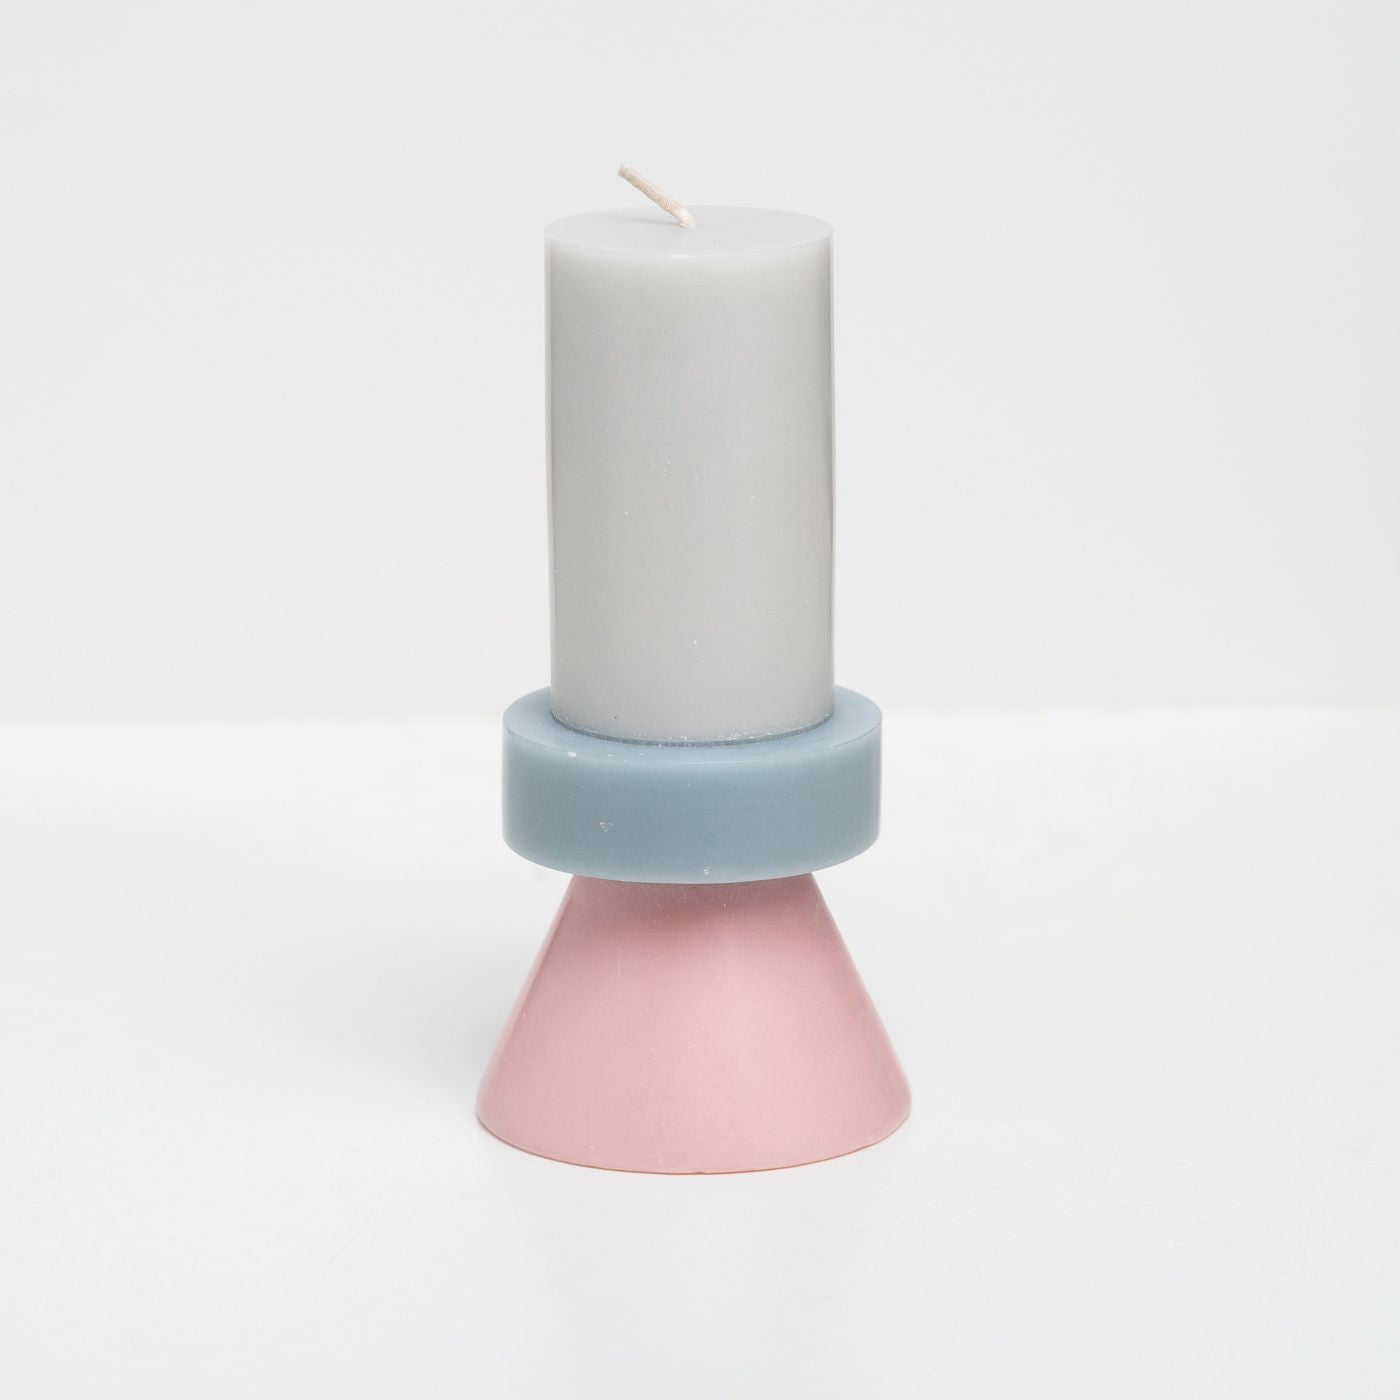 Stack Candle Tall, shaped candles by Yod and co in grey, blue, pink